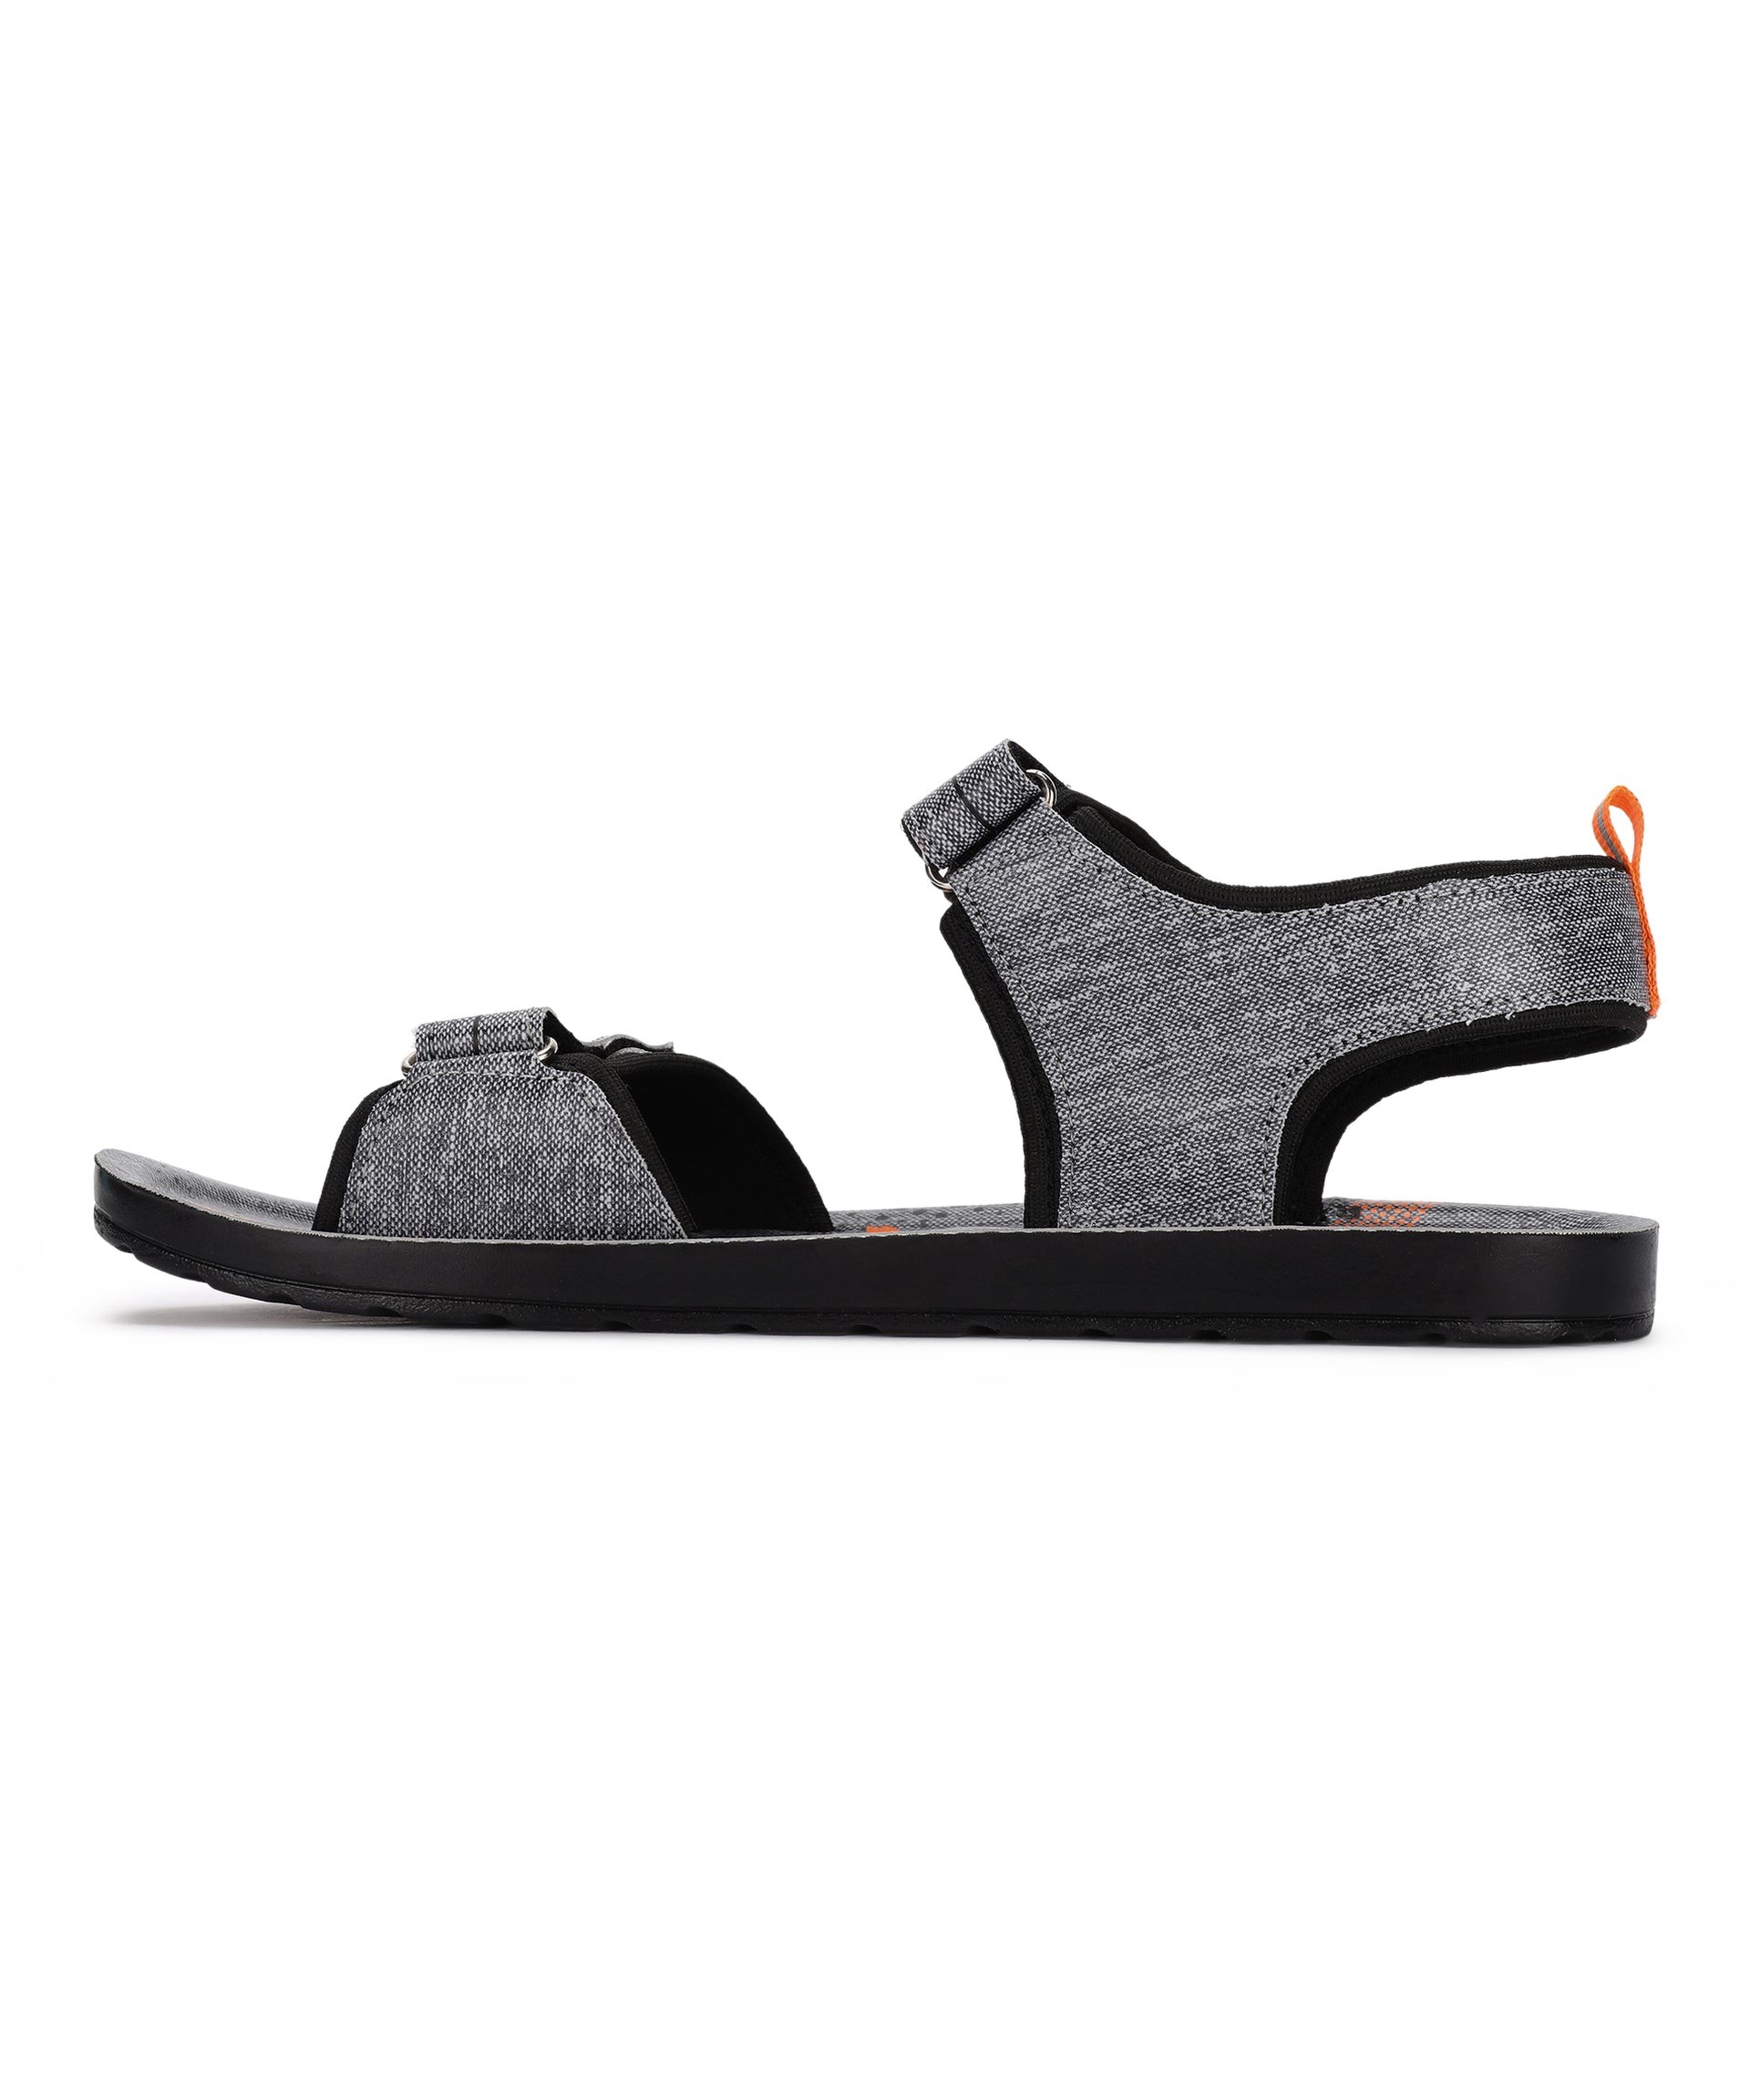 Paragon PUK2214G Men Stylish Sandals | Comfortable Sandals for Daily Outdoor Use | Casual Formal Sandals with Cushioned Soles